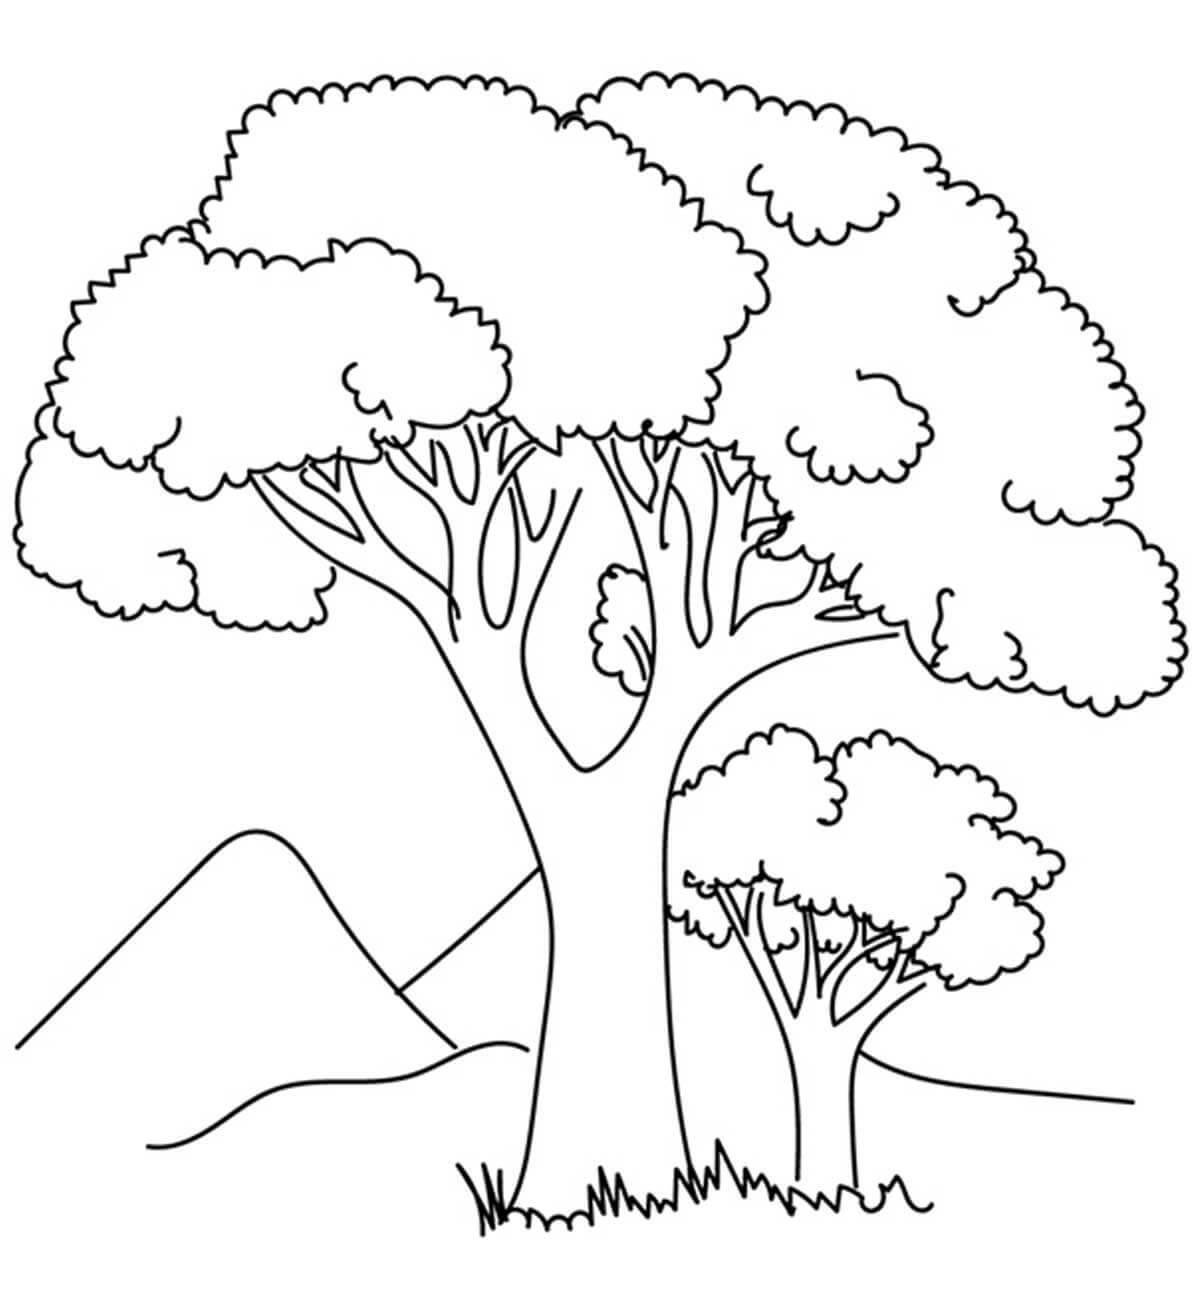 Amazing tree coloring page for kids